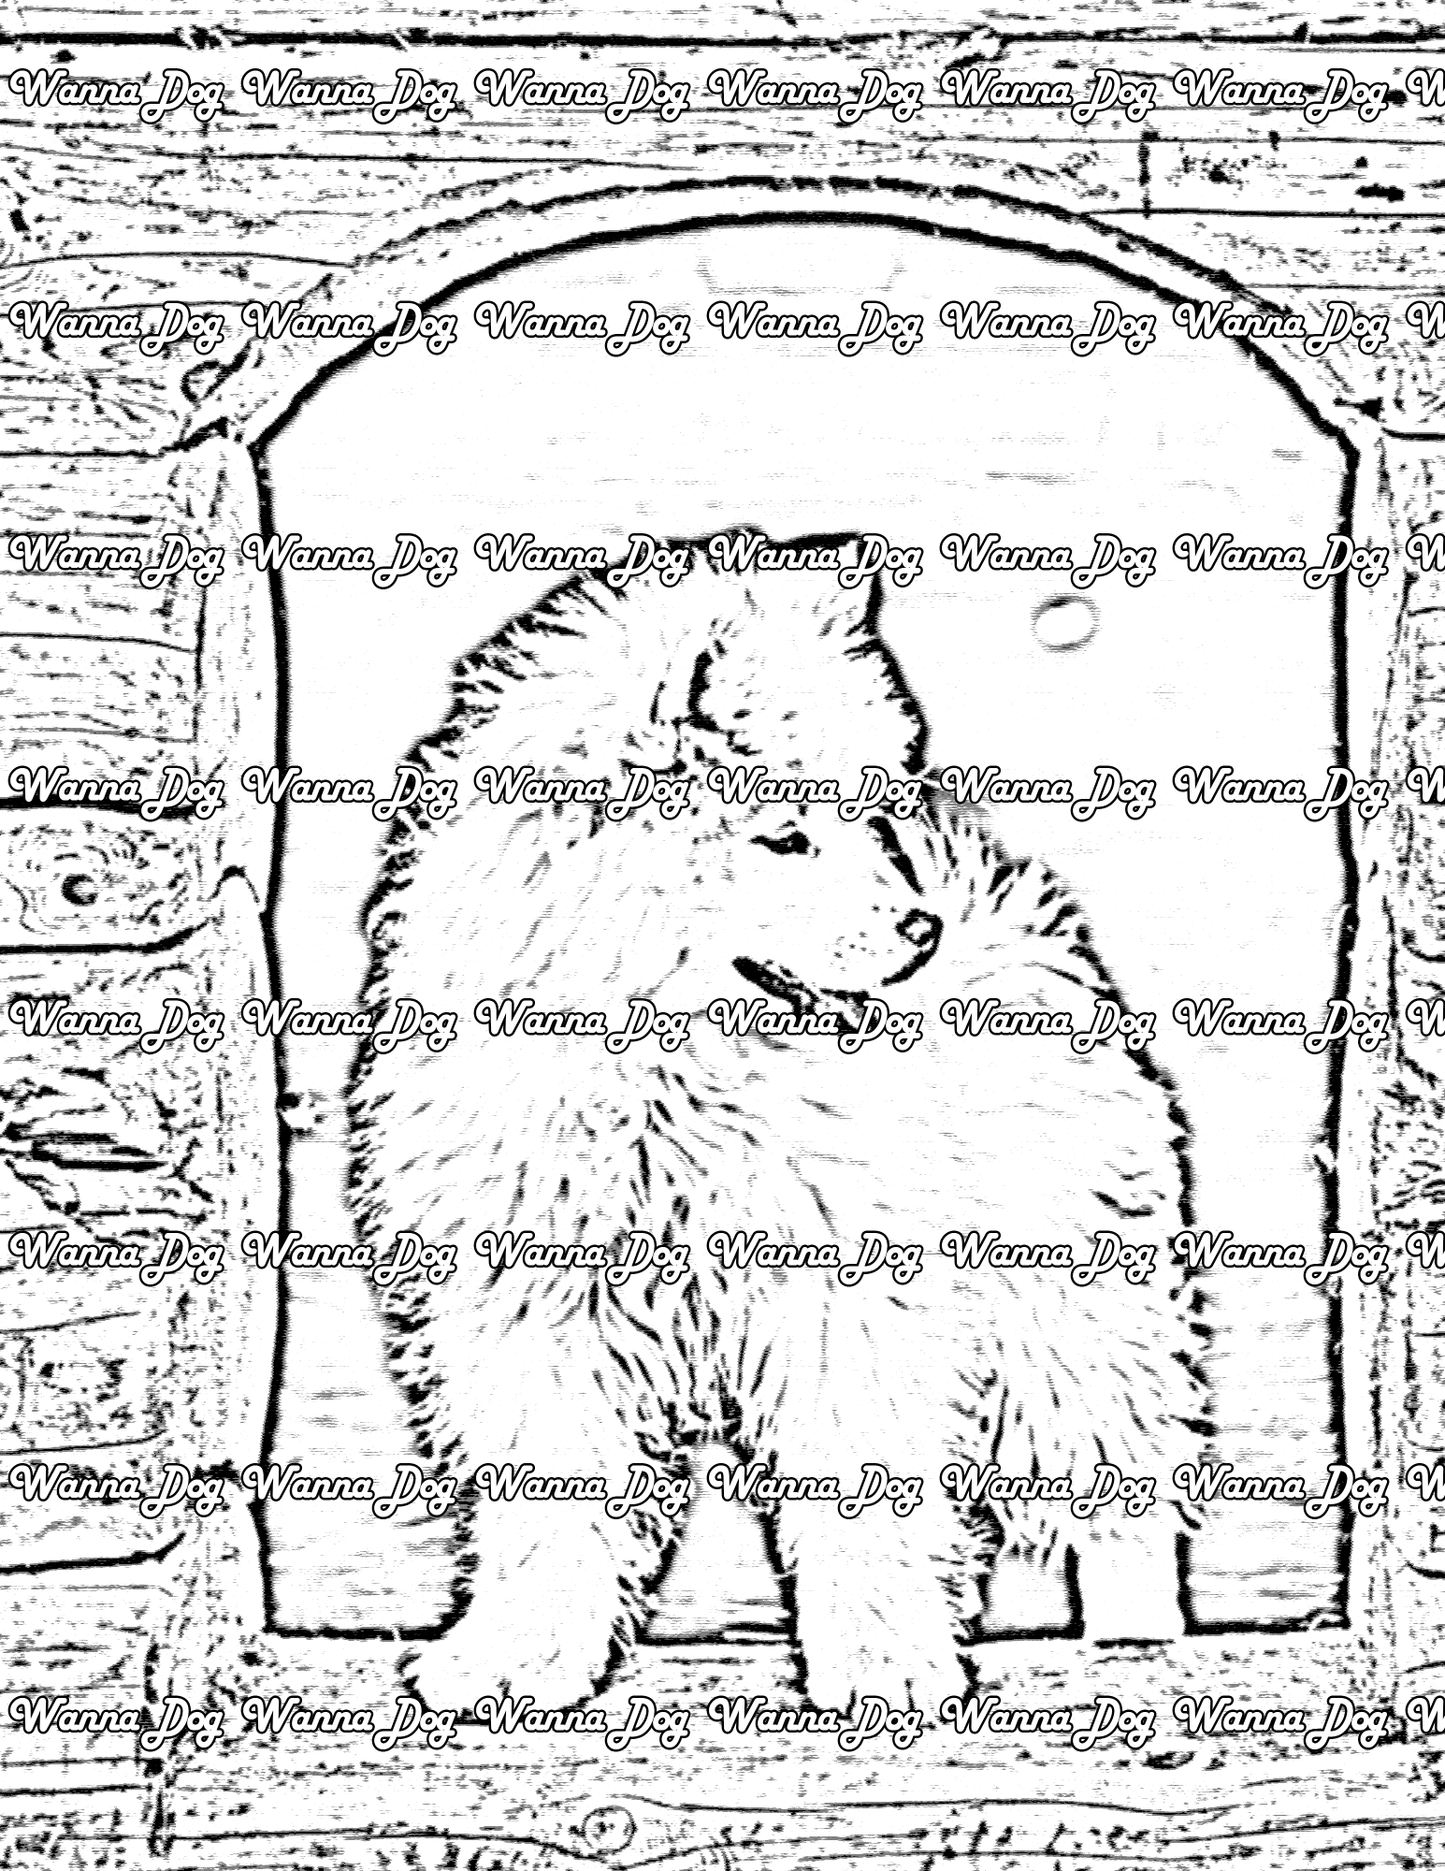 Samoyed Coloring Page of a Samoyed standing in a dog house